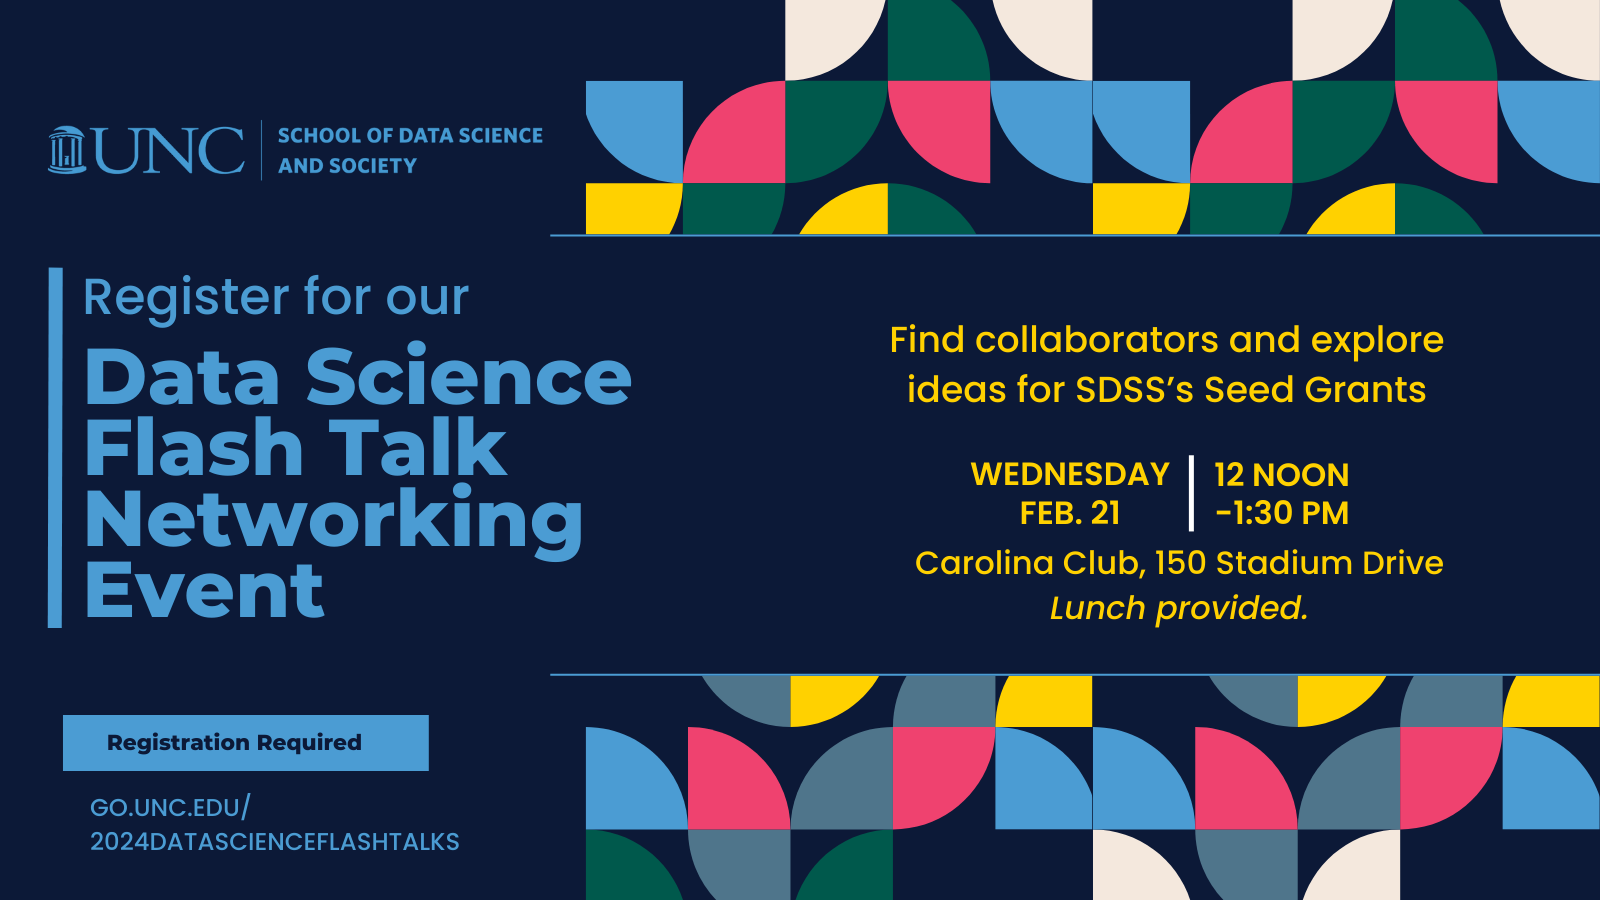 Register for our Data Science Flash talk Networking Event Registration required go.unc.edu/2024DataScienceFlashTalks Find collaborators and explore ideas for SDSS's seed grants. 12 noon - 1:30 p.m., Wednesday, Feb. 21 Carolina Club, 150 Stadium Drive, lunch provided